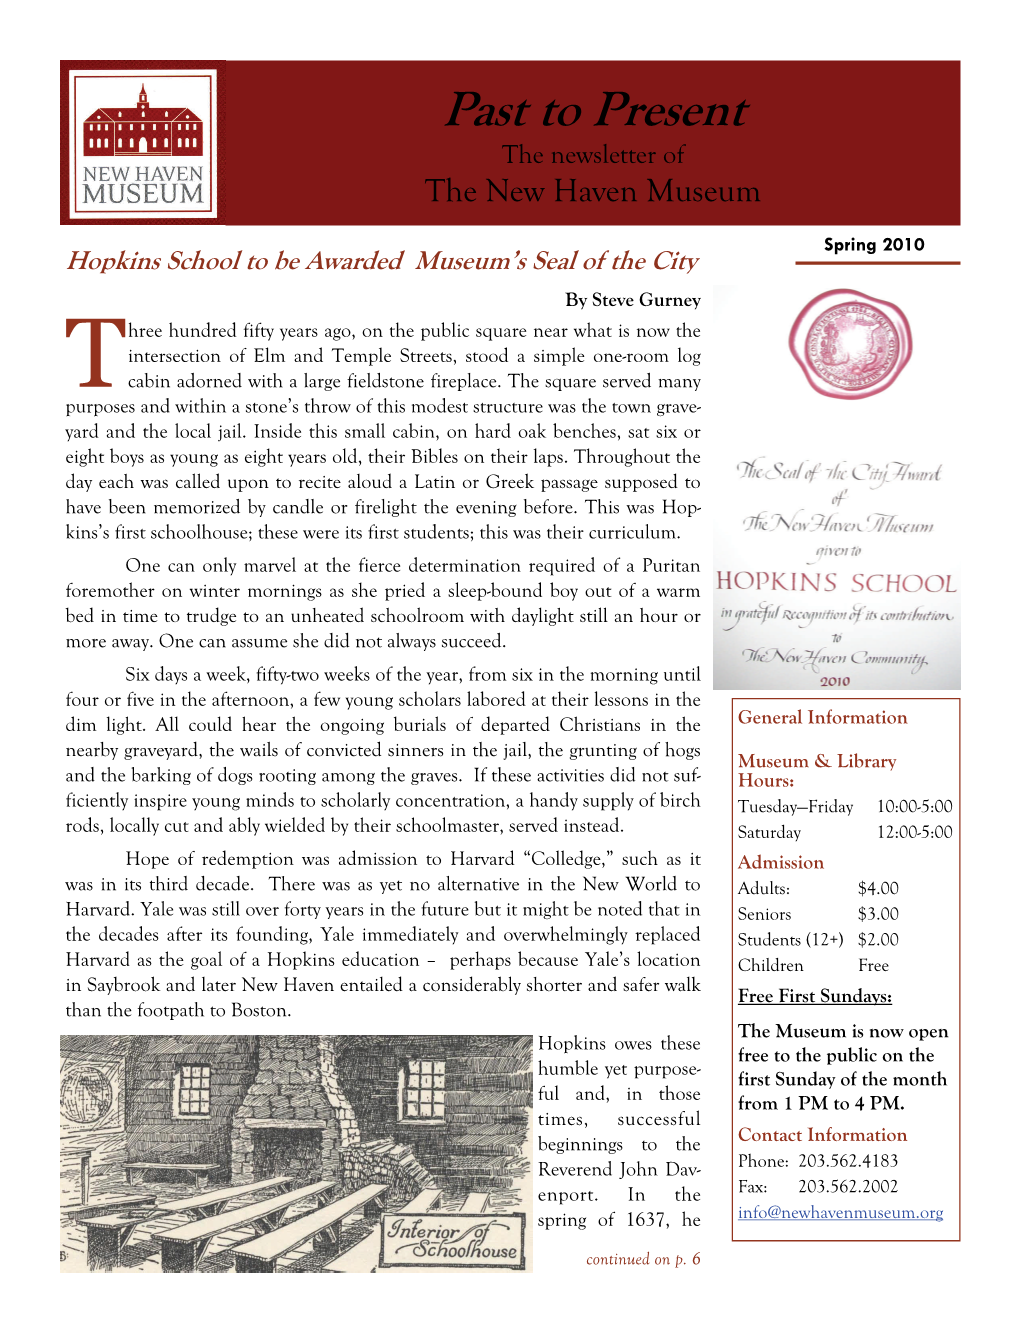 Past to Present the Newsletter of the New Haven Museum